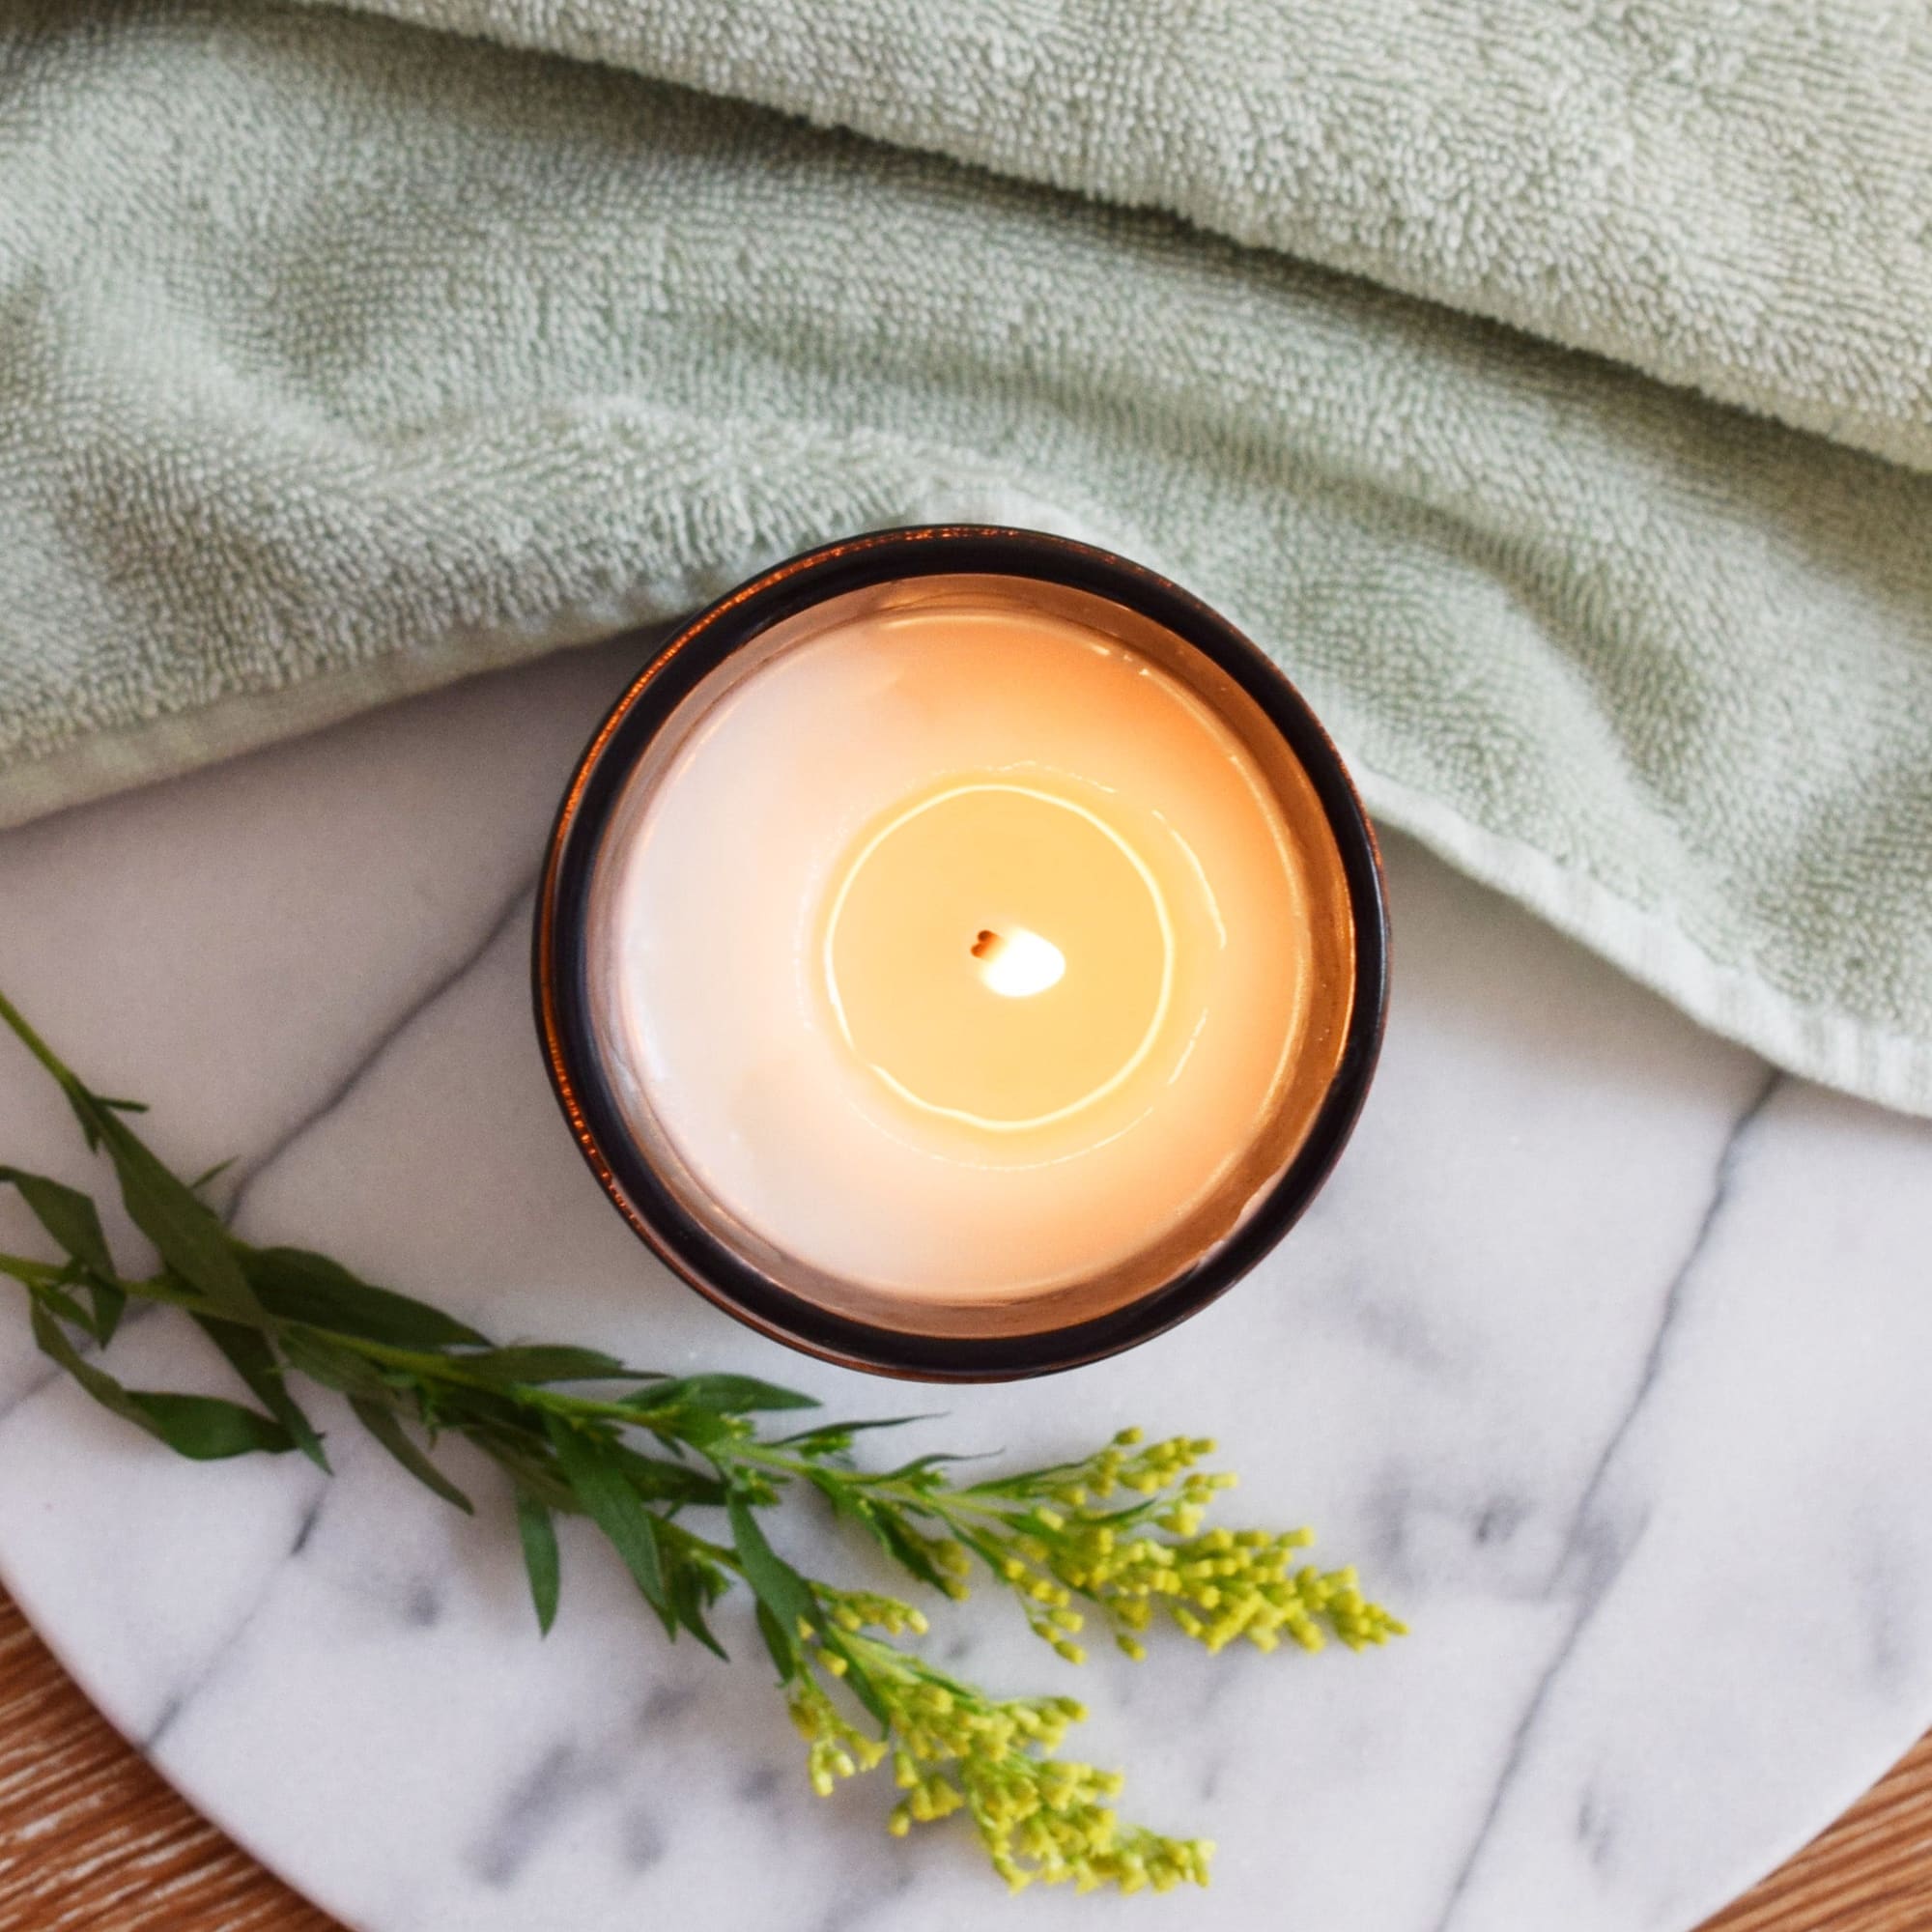 Rosemary & Mint Soy Candle | The Baltic Club